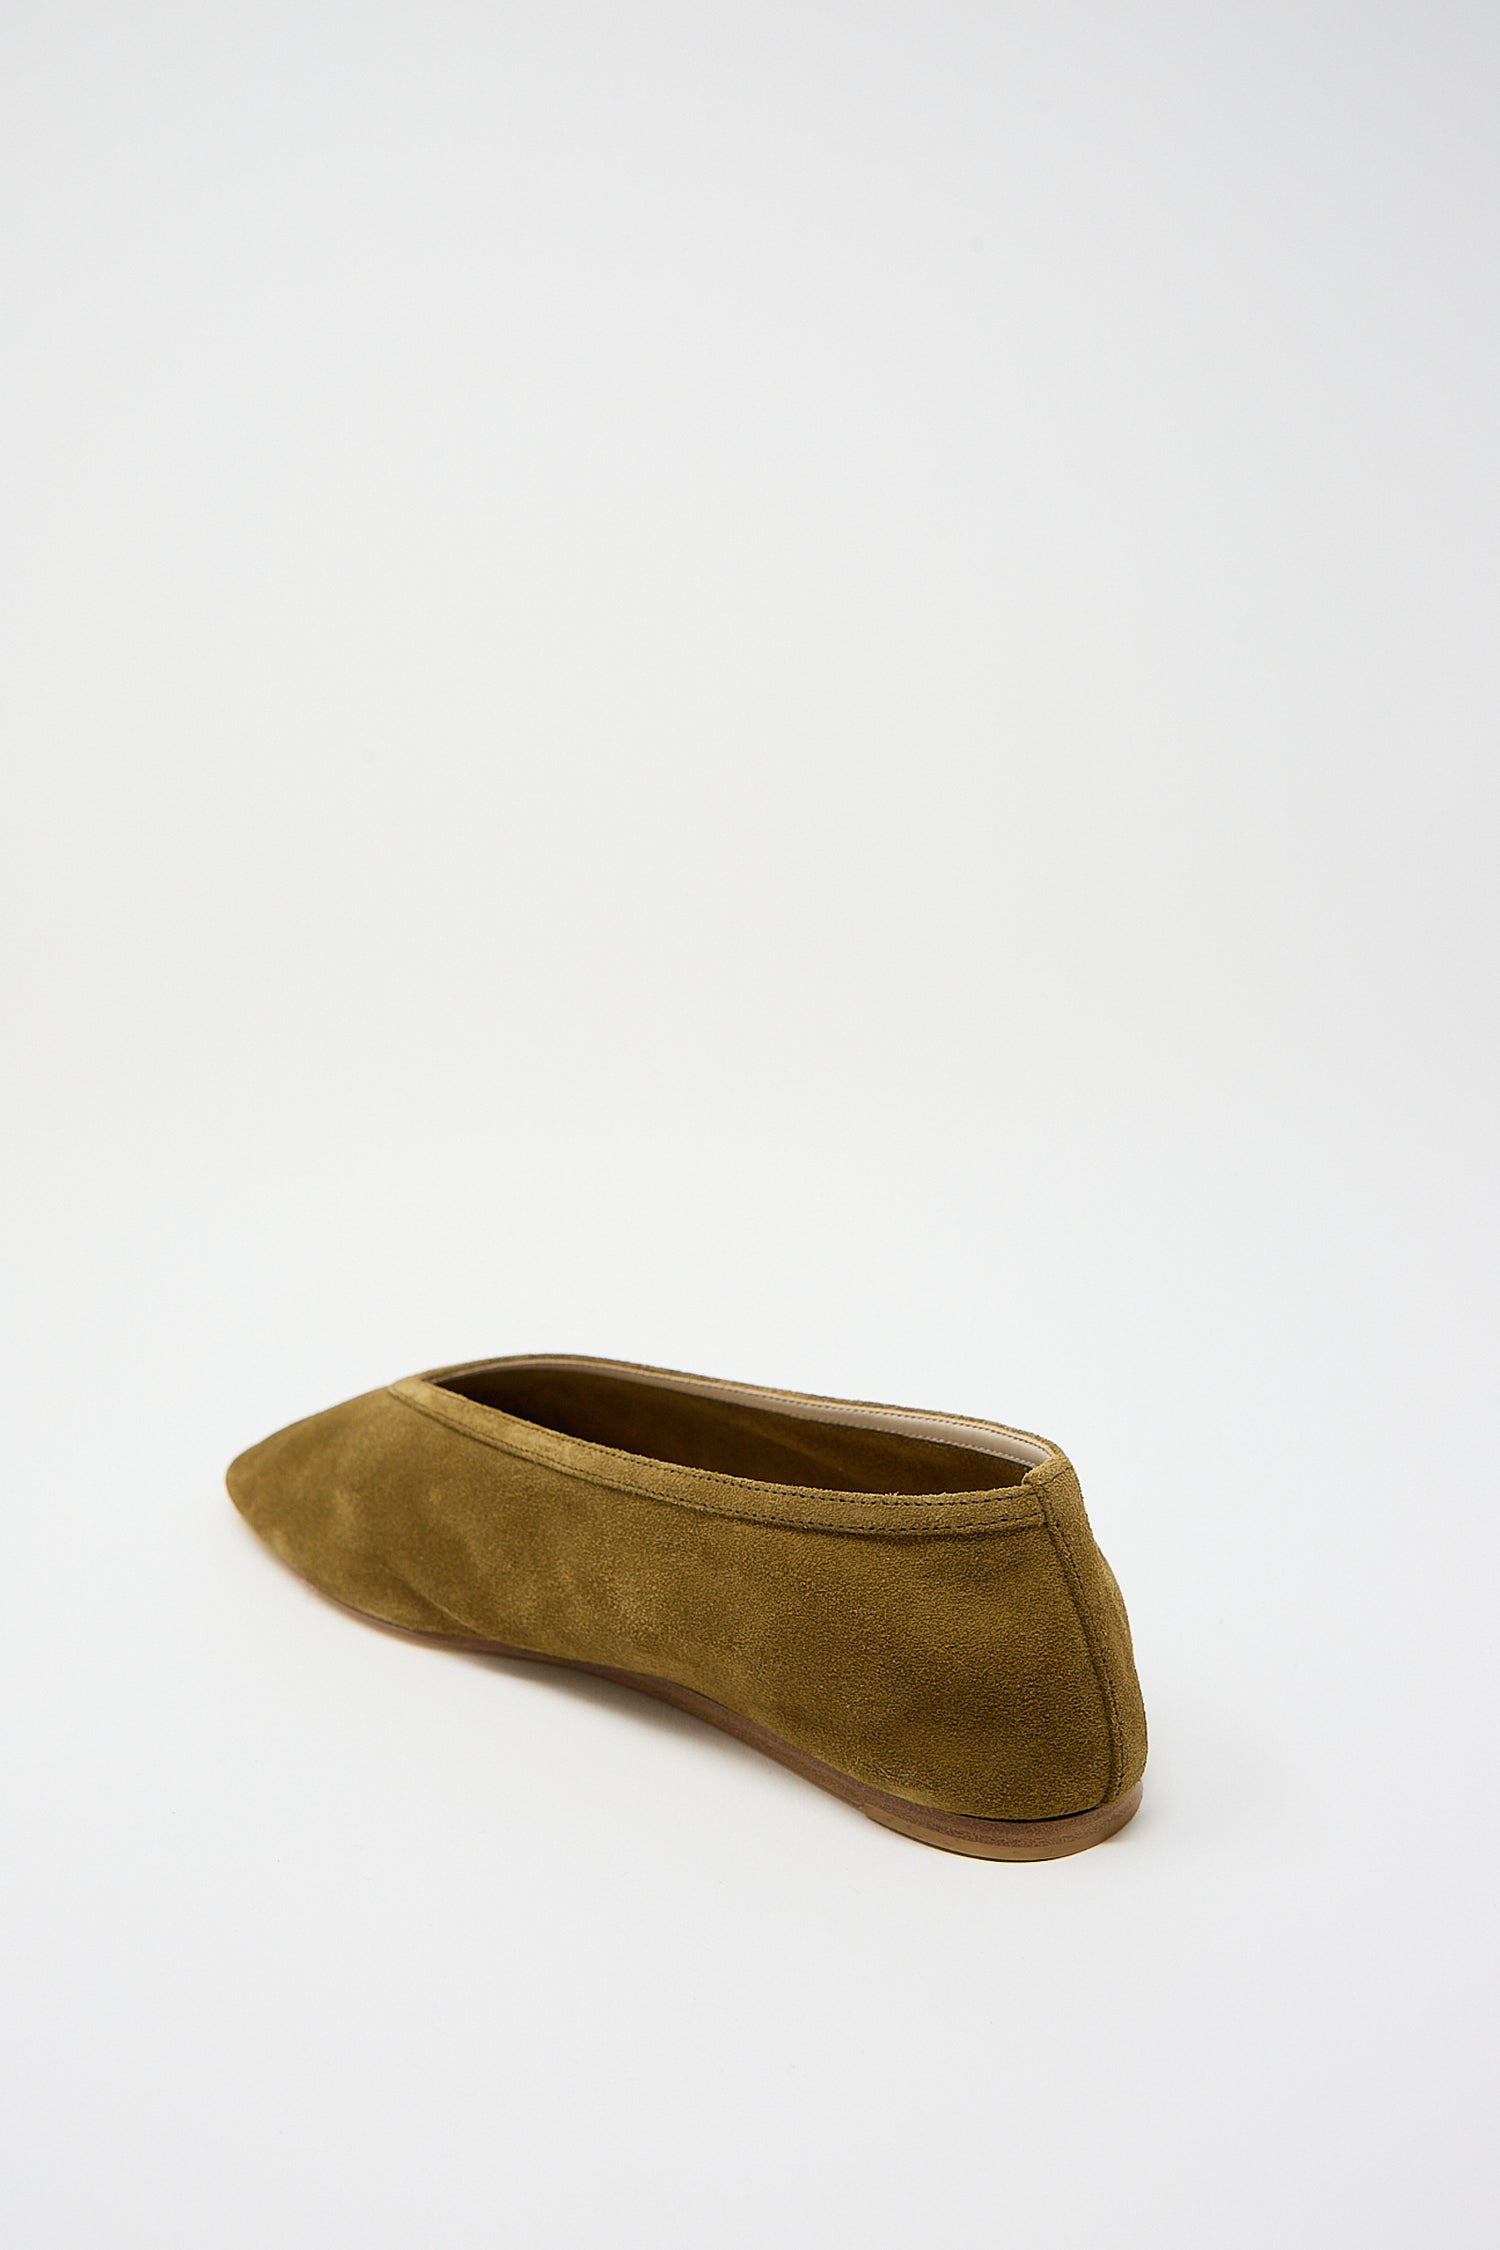 Olive green Suede Luna Slipper in Taupe by Le Monde Beryl on a white background.